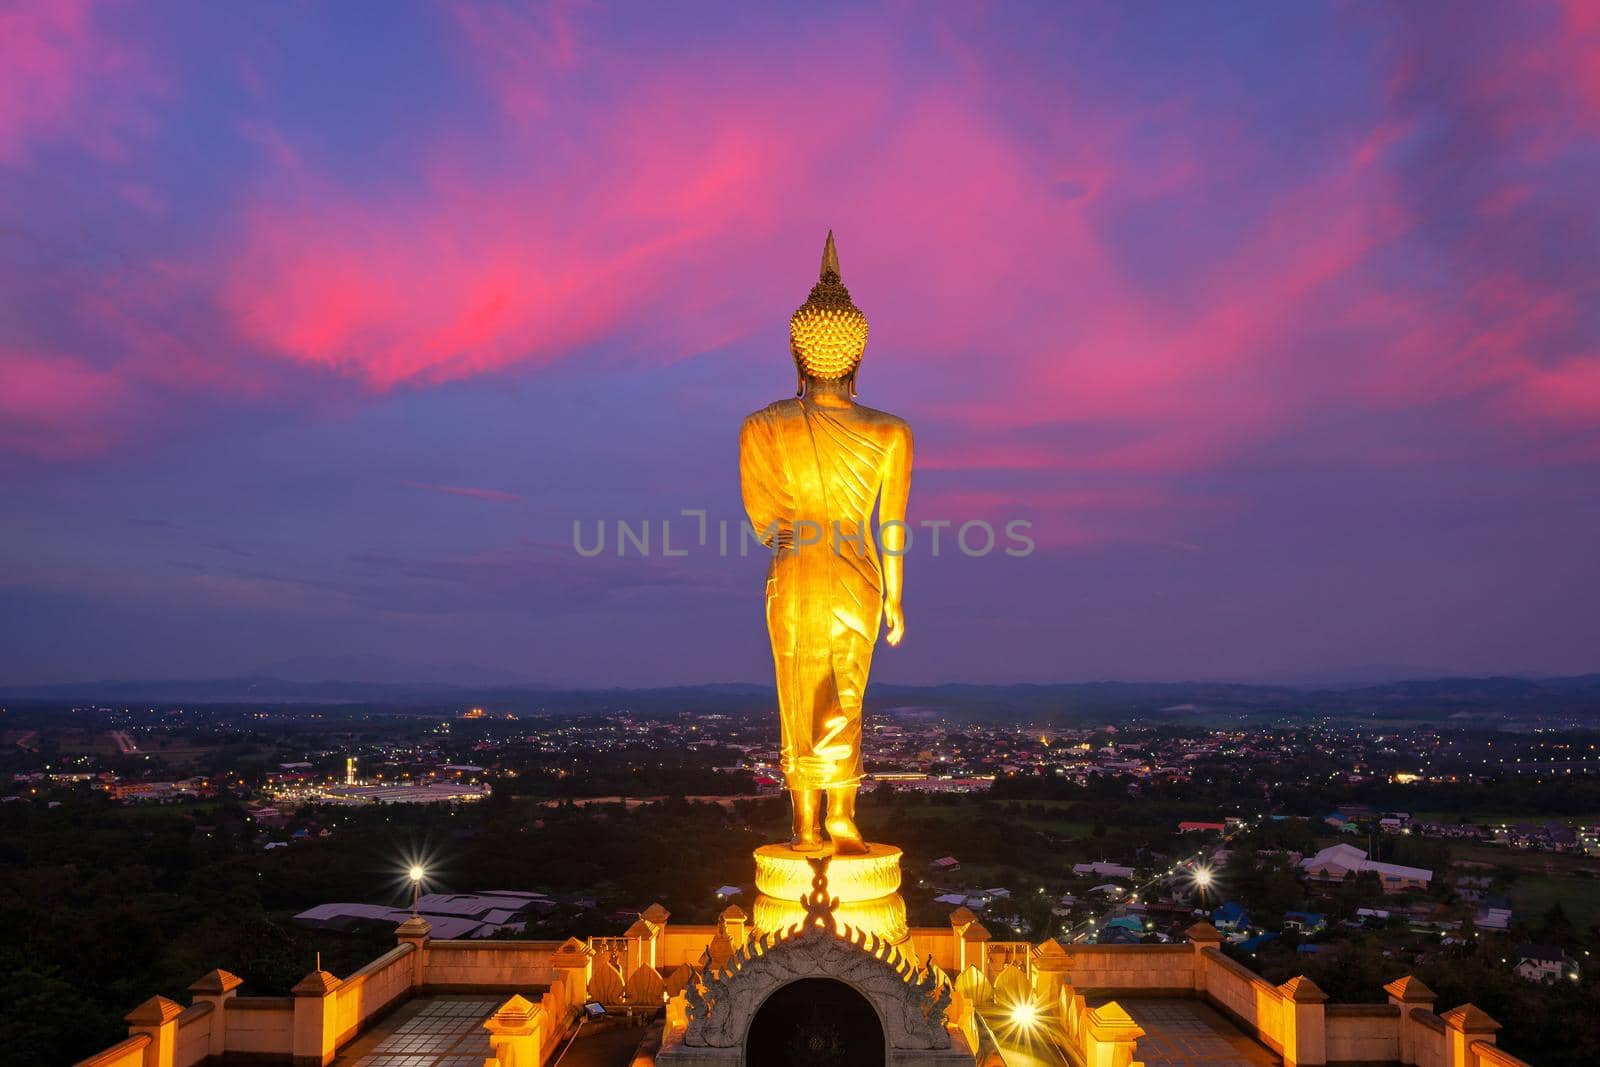 The Blessing Buddha at wat phra that khao noi during sunset at Nan province ,Thailand by Nuamfolio